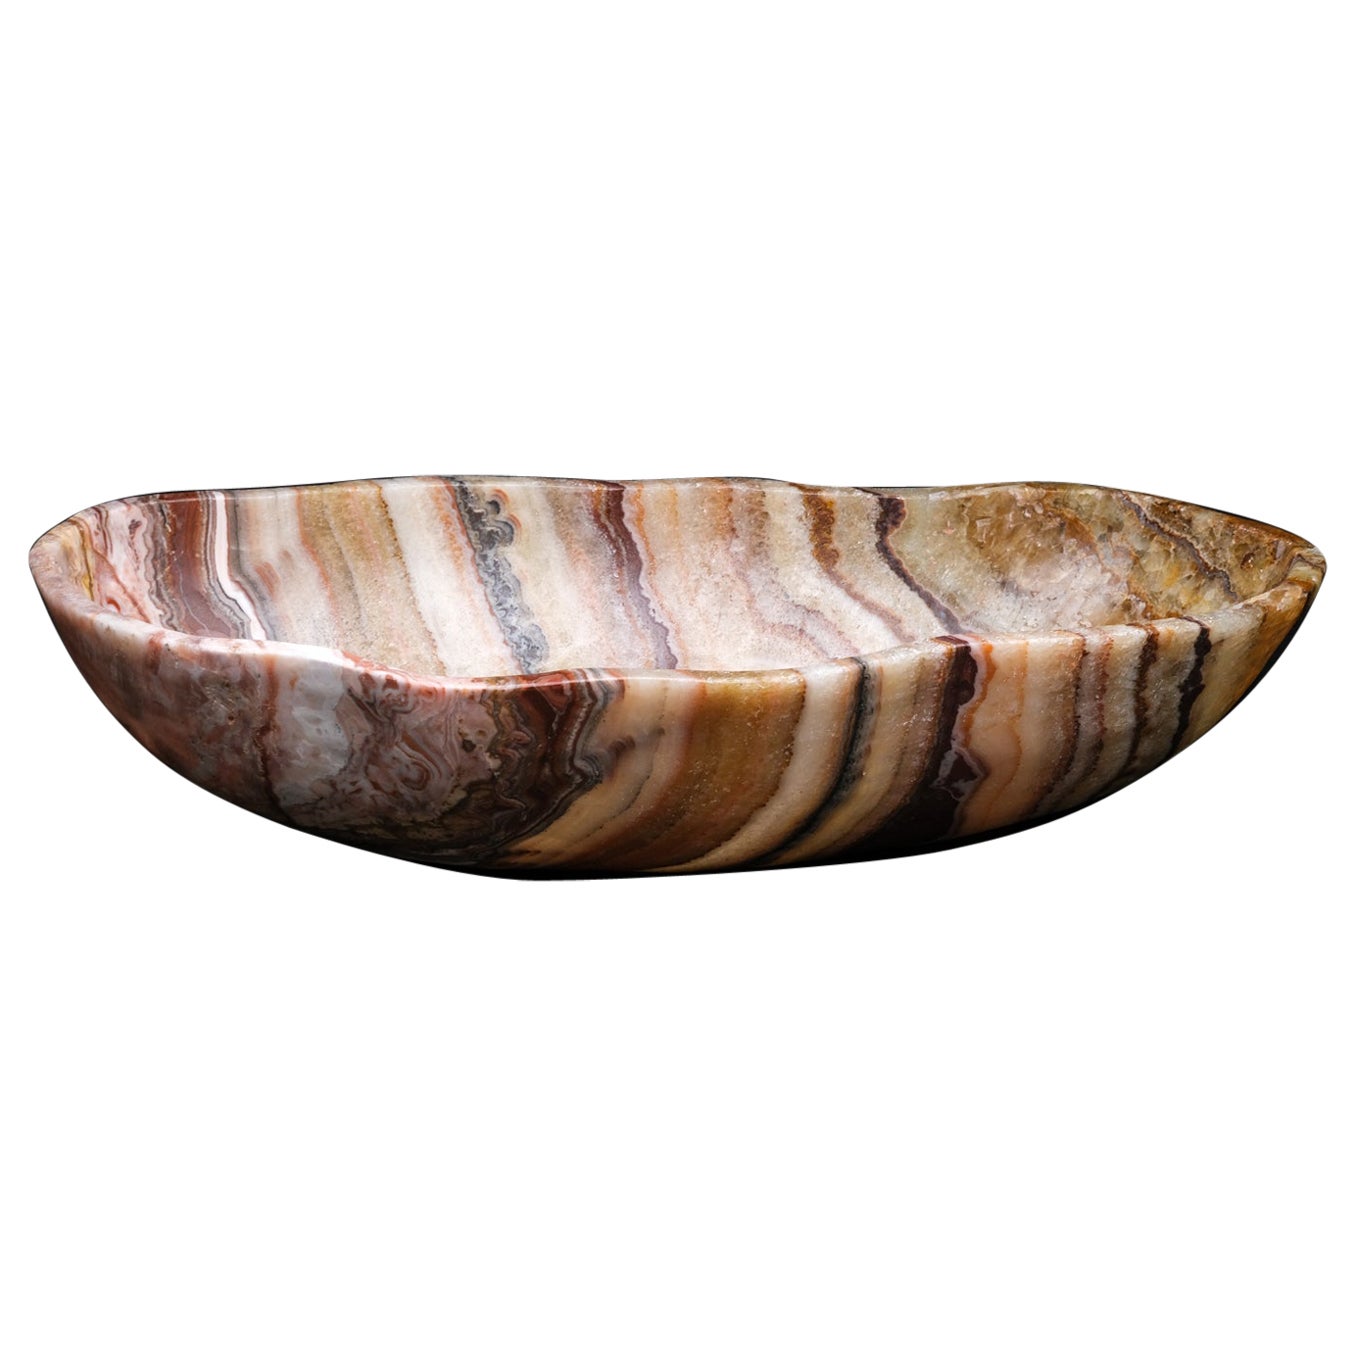 Large Polished Rainbow Onyx Canoe Bowl from Mexico (19.2 lbs) For Sale